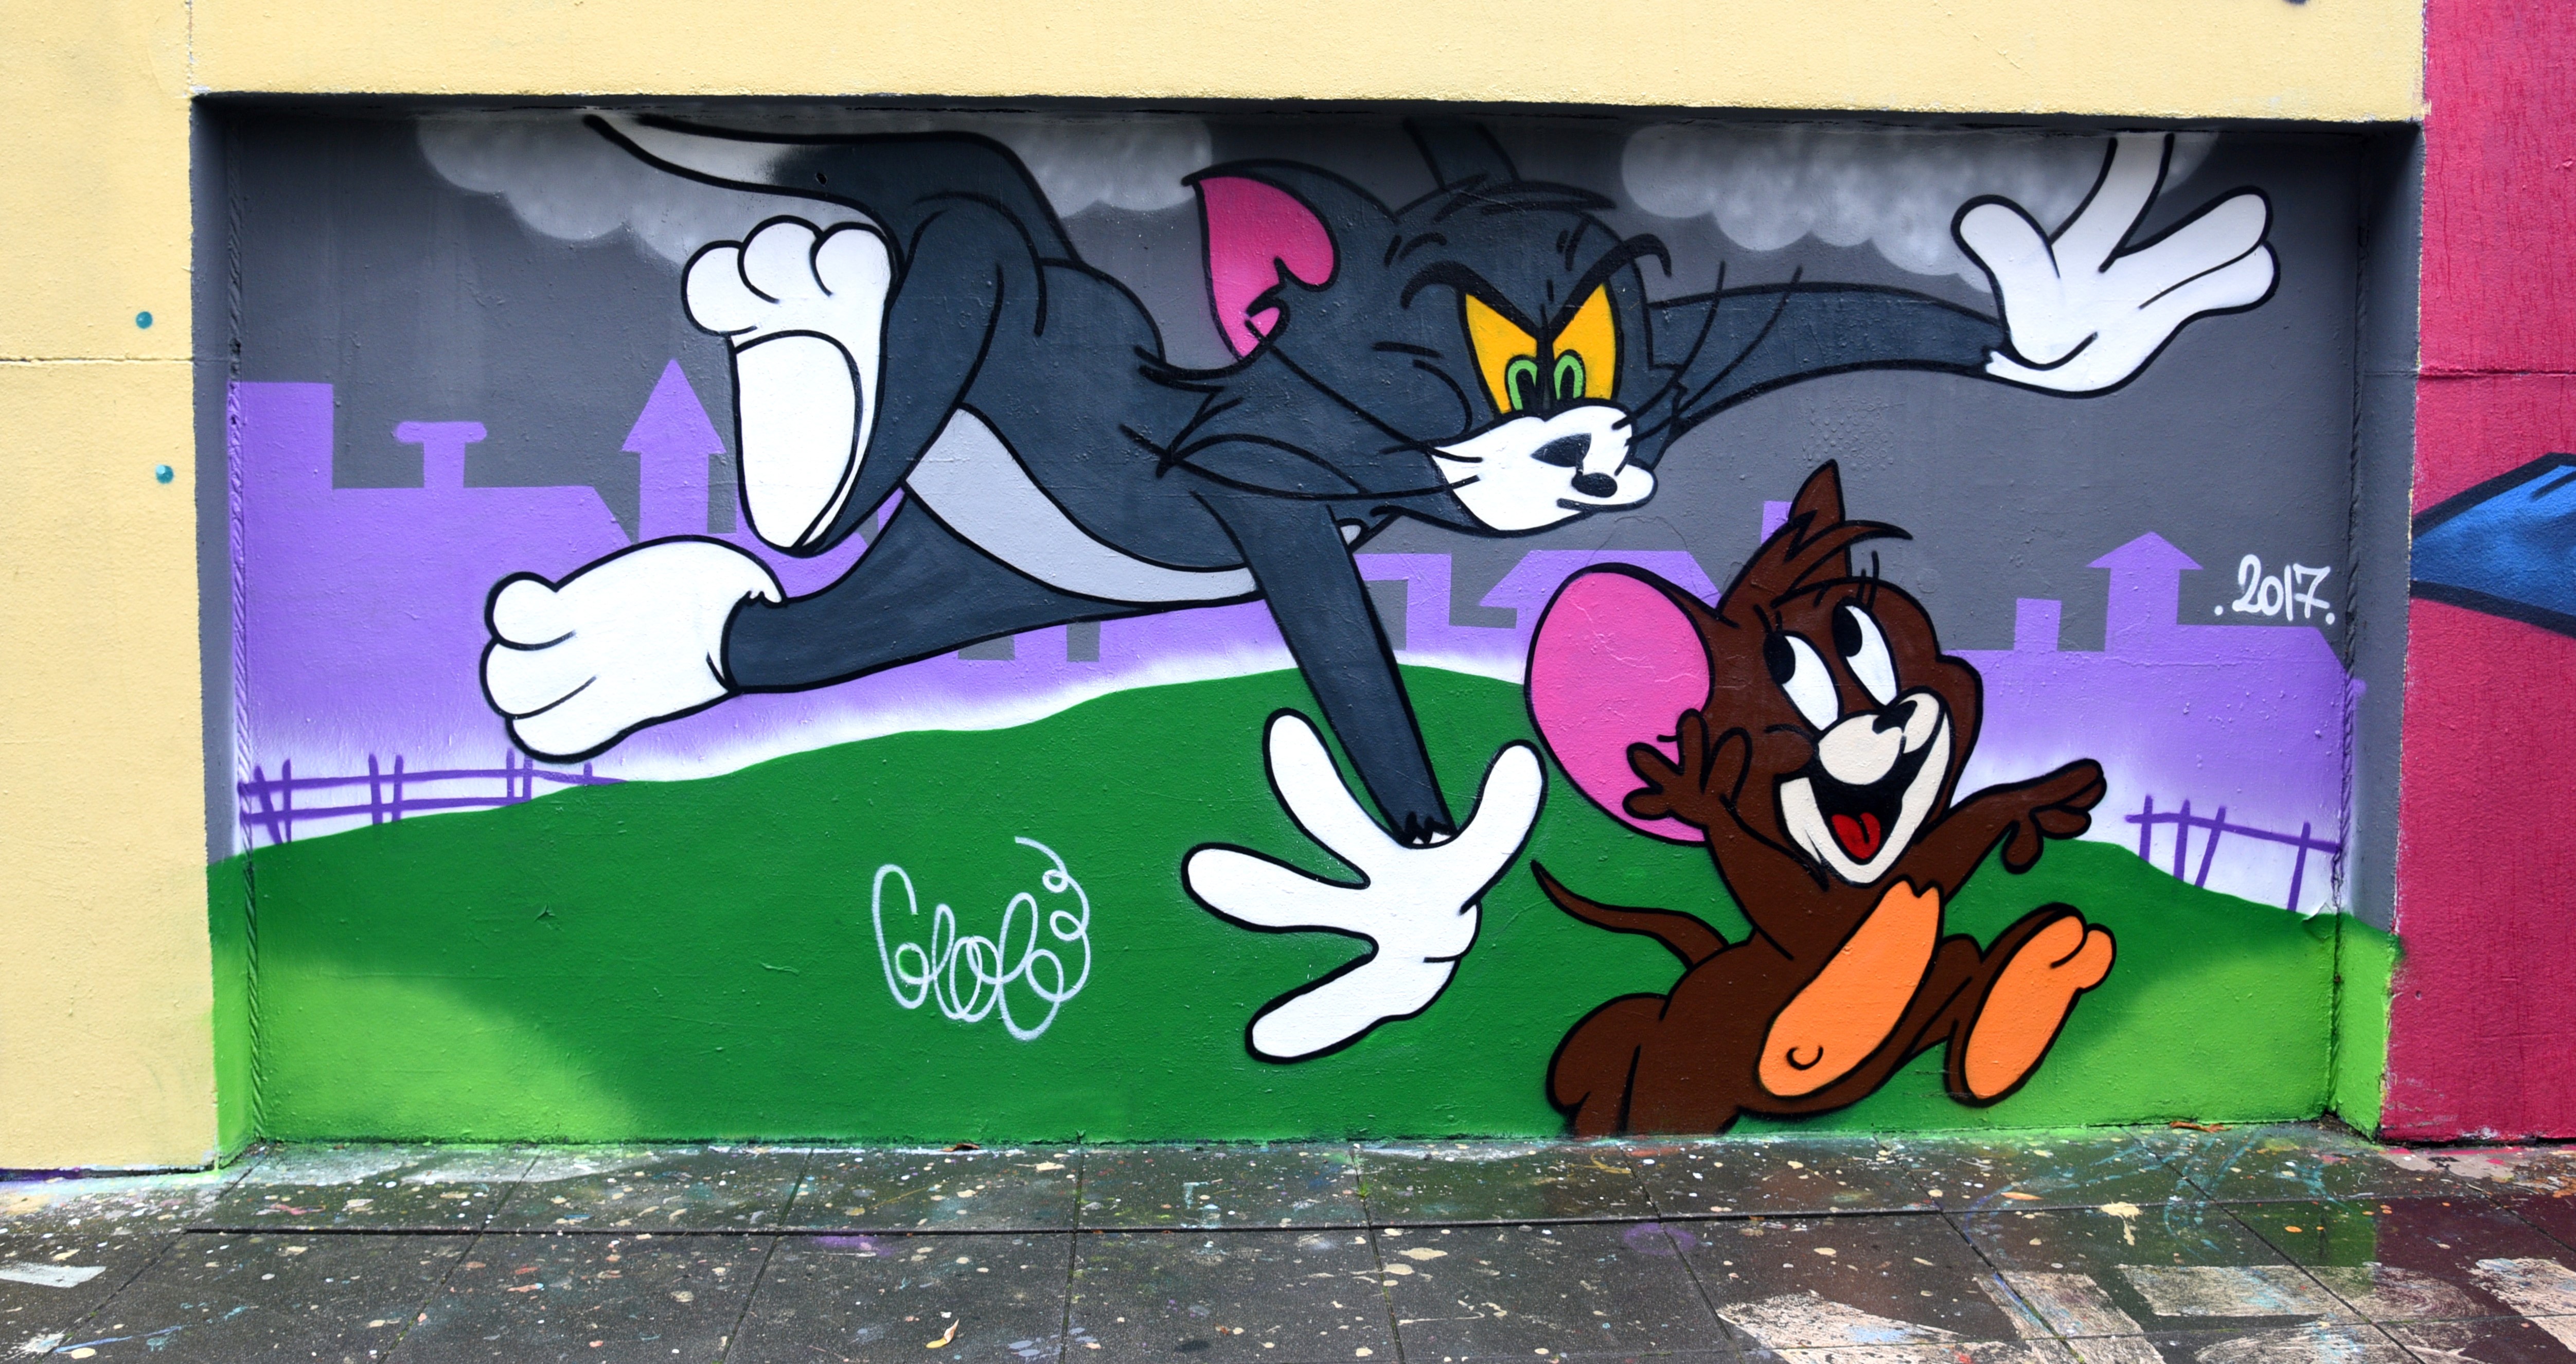 Image of “Tom and Jerry” by Lionel Roll on Flickr. Used under CC 2.0